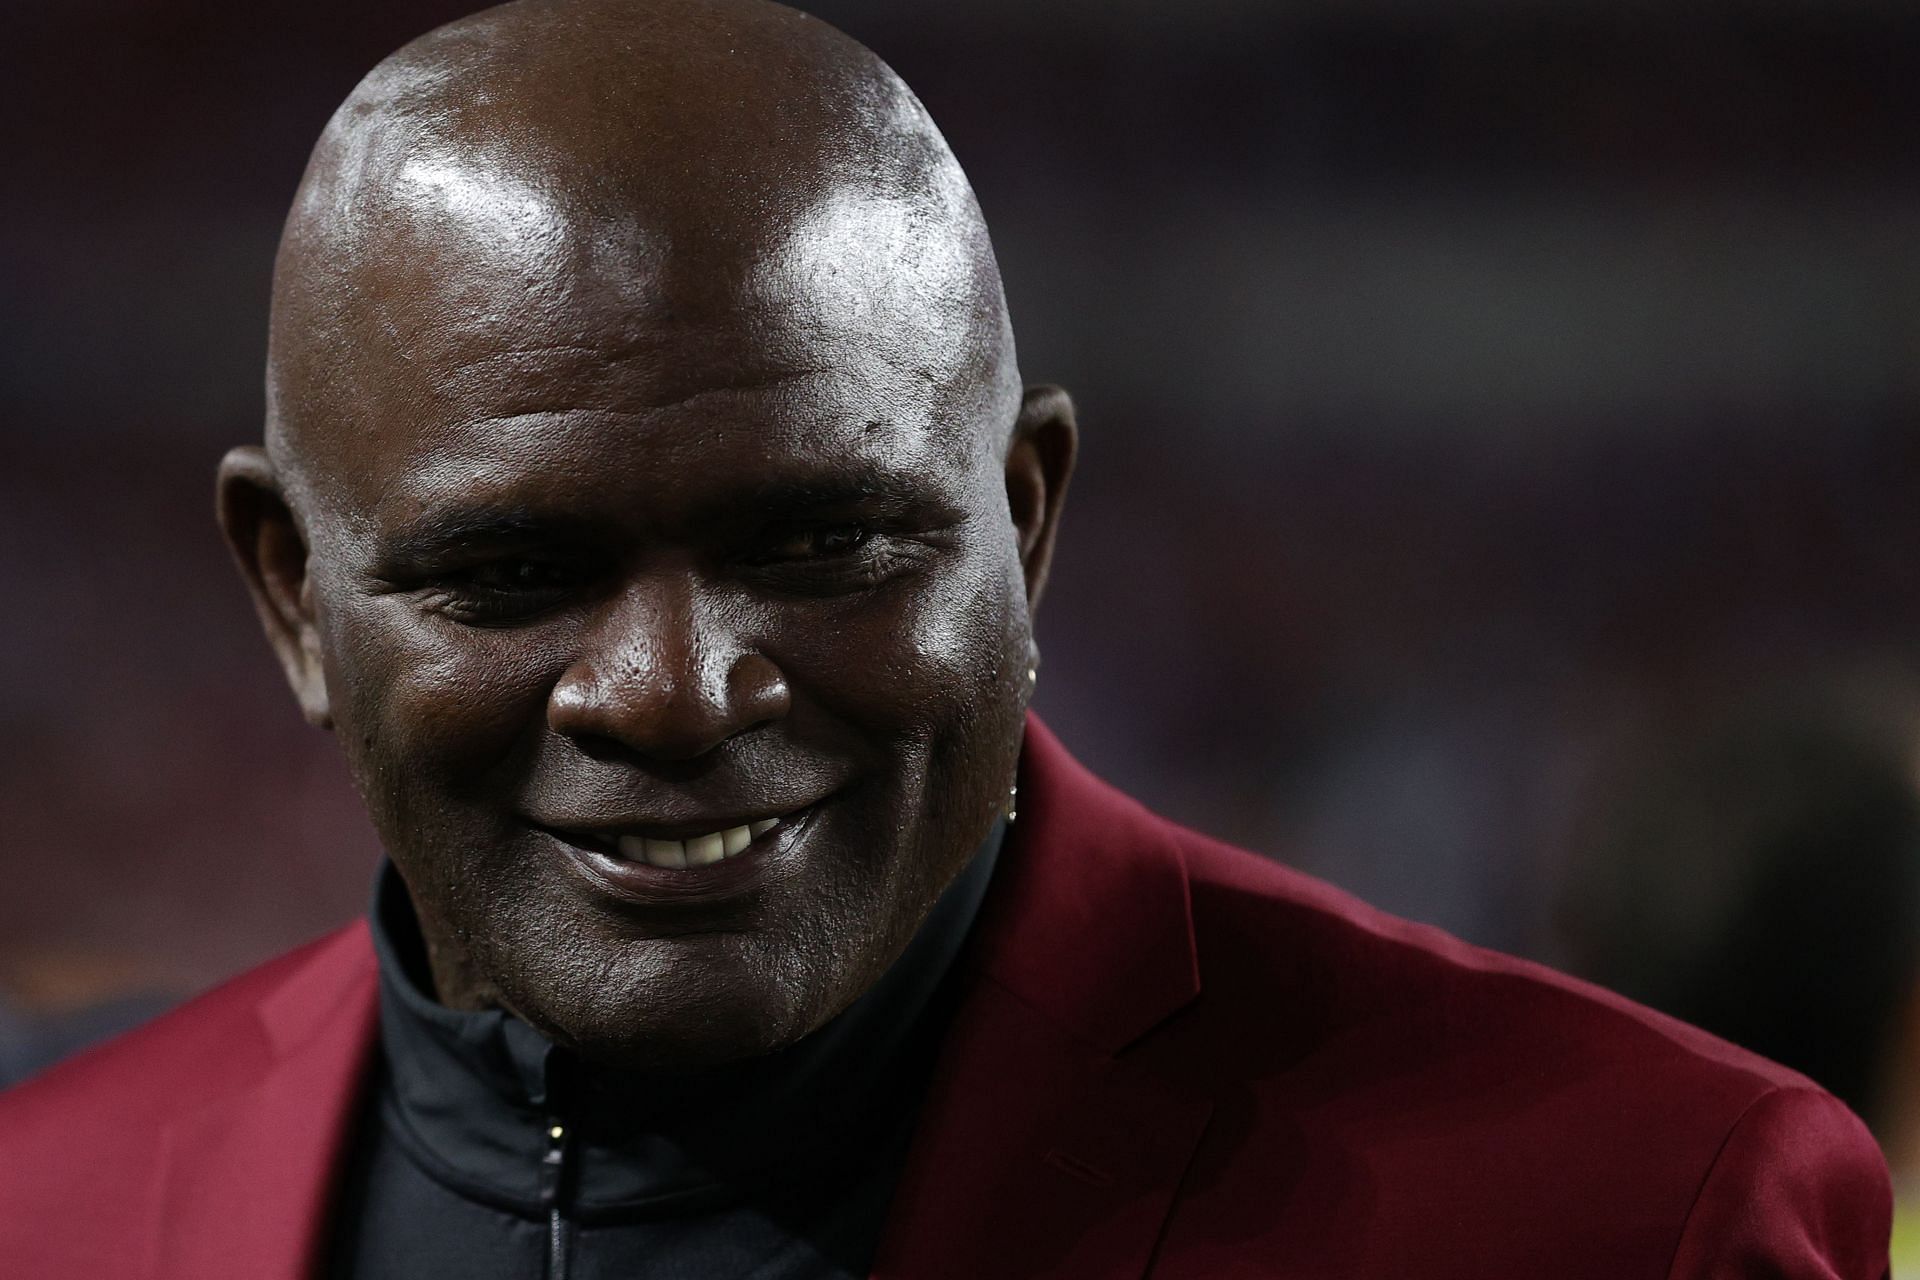 Lawrence Taylor Was the Apex Predator of the NFL